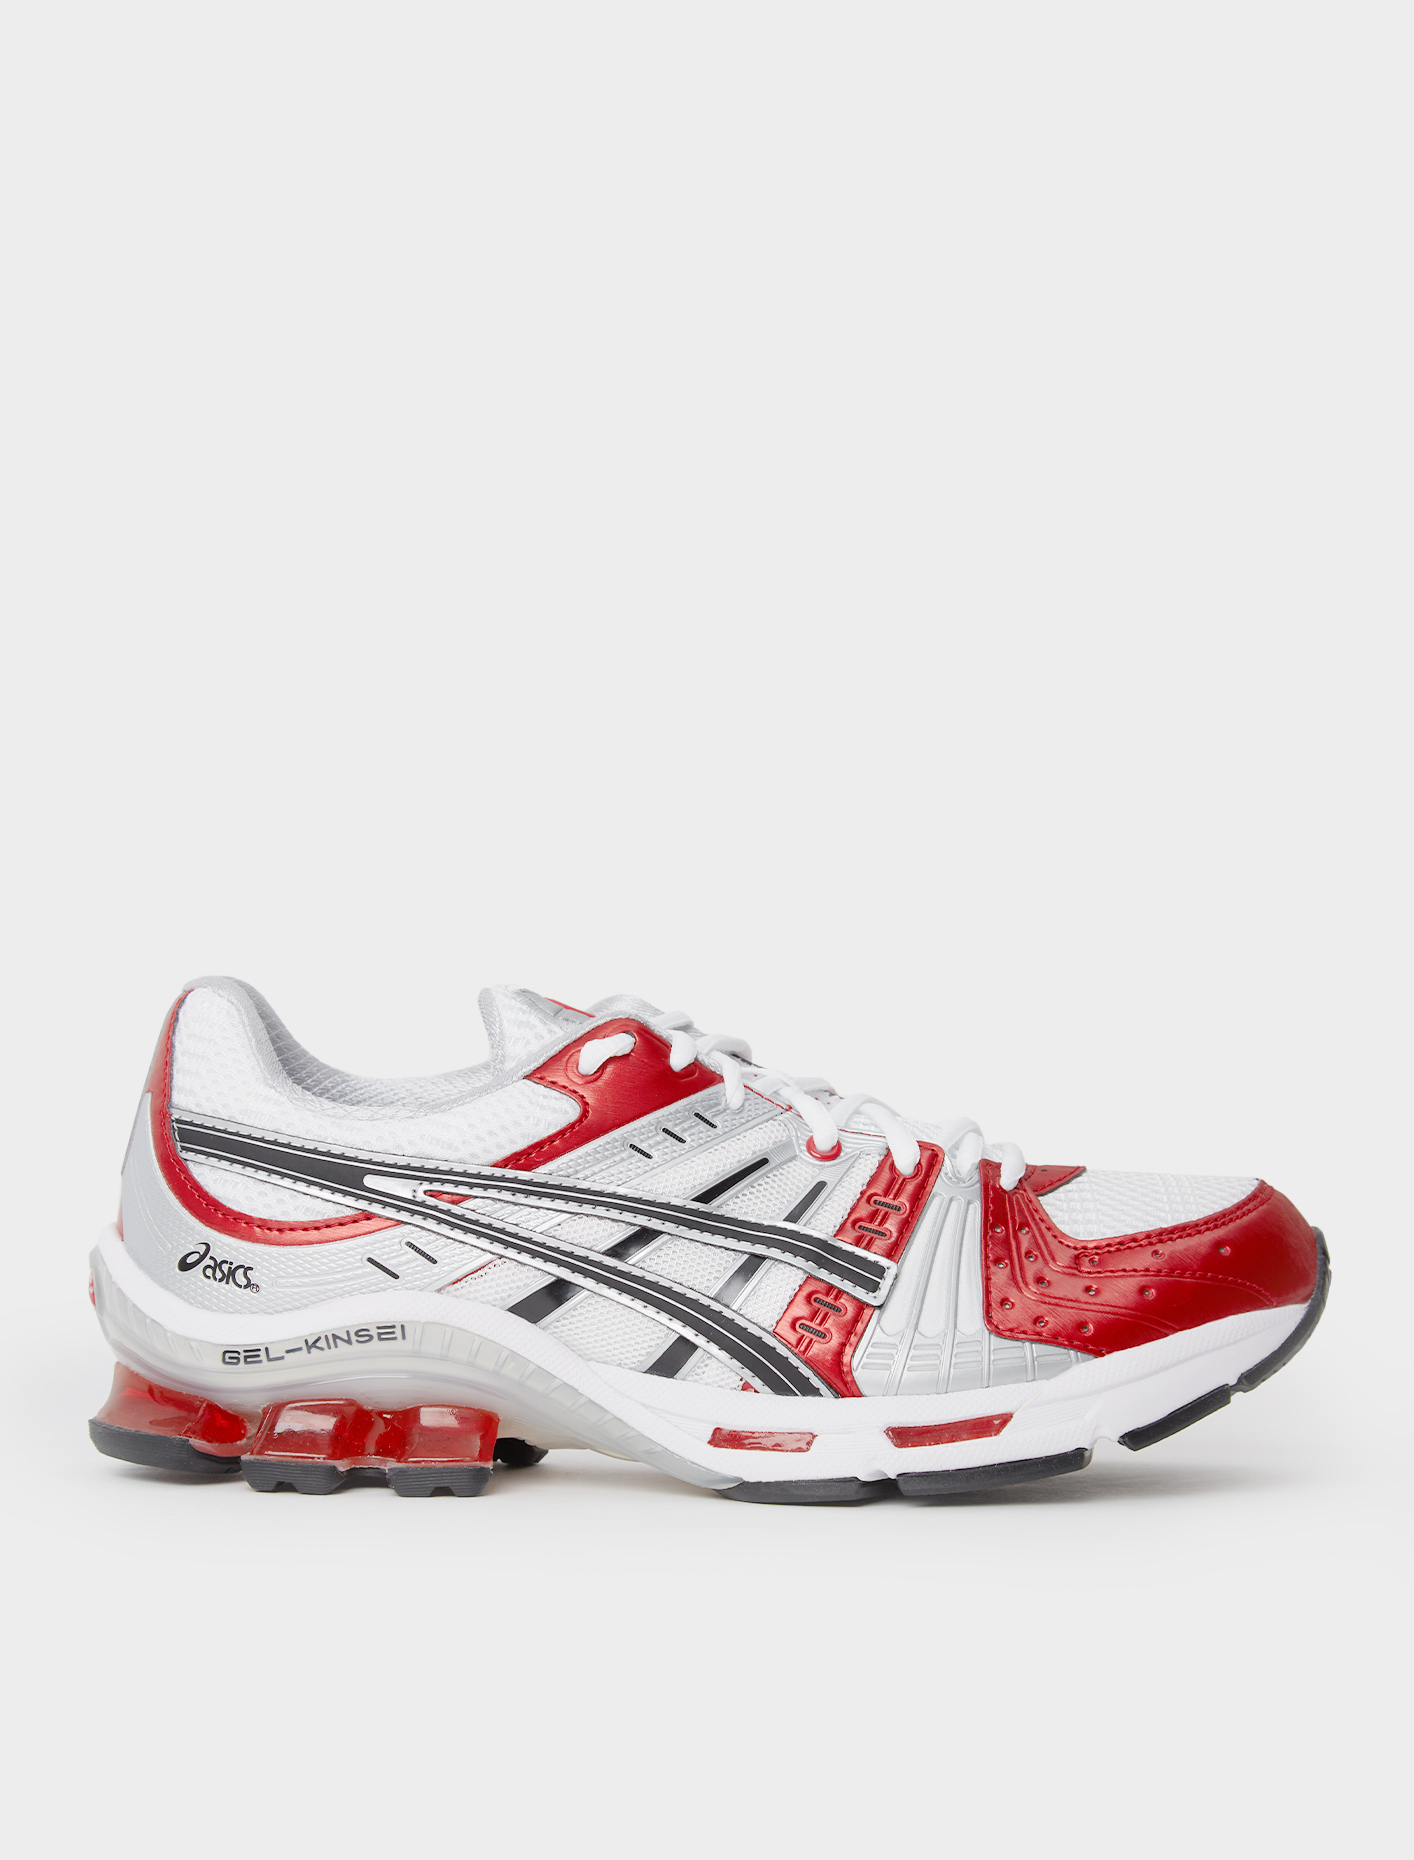 asics sneakers red